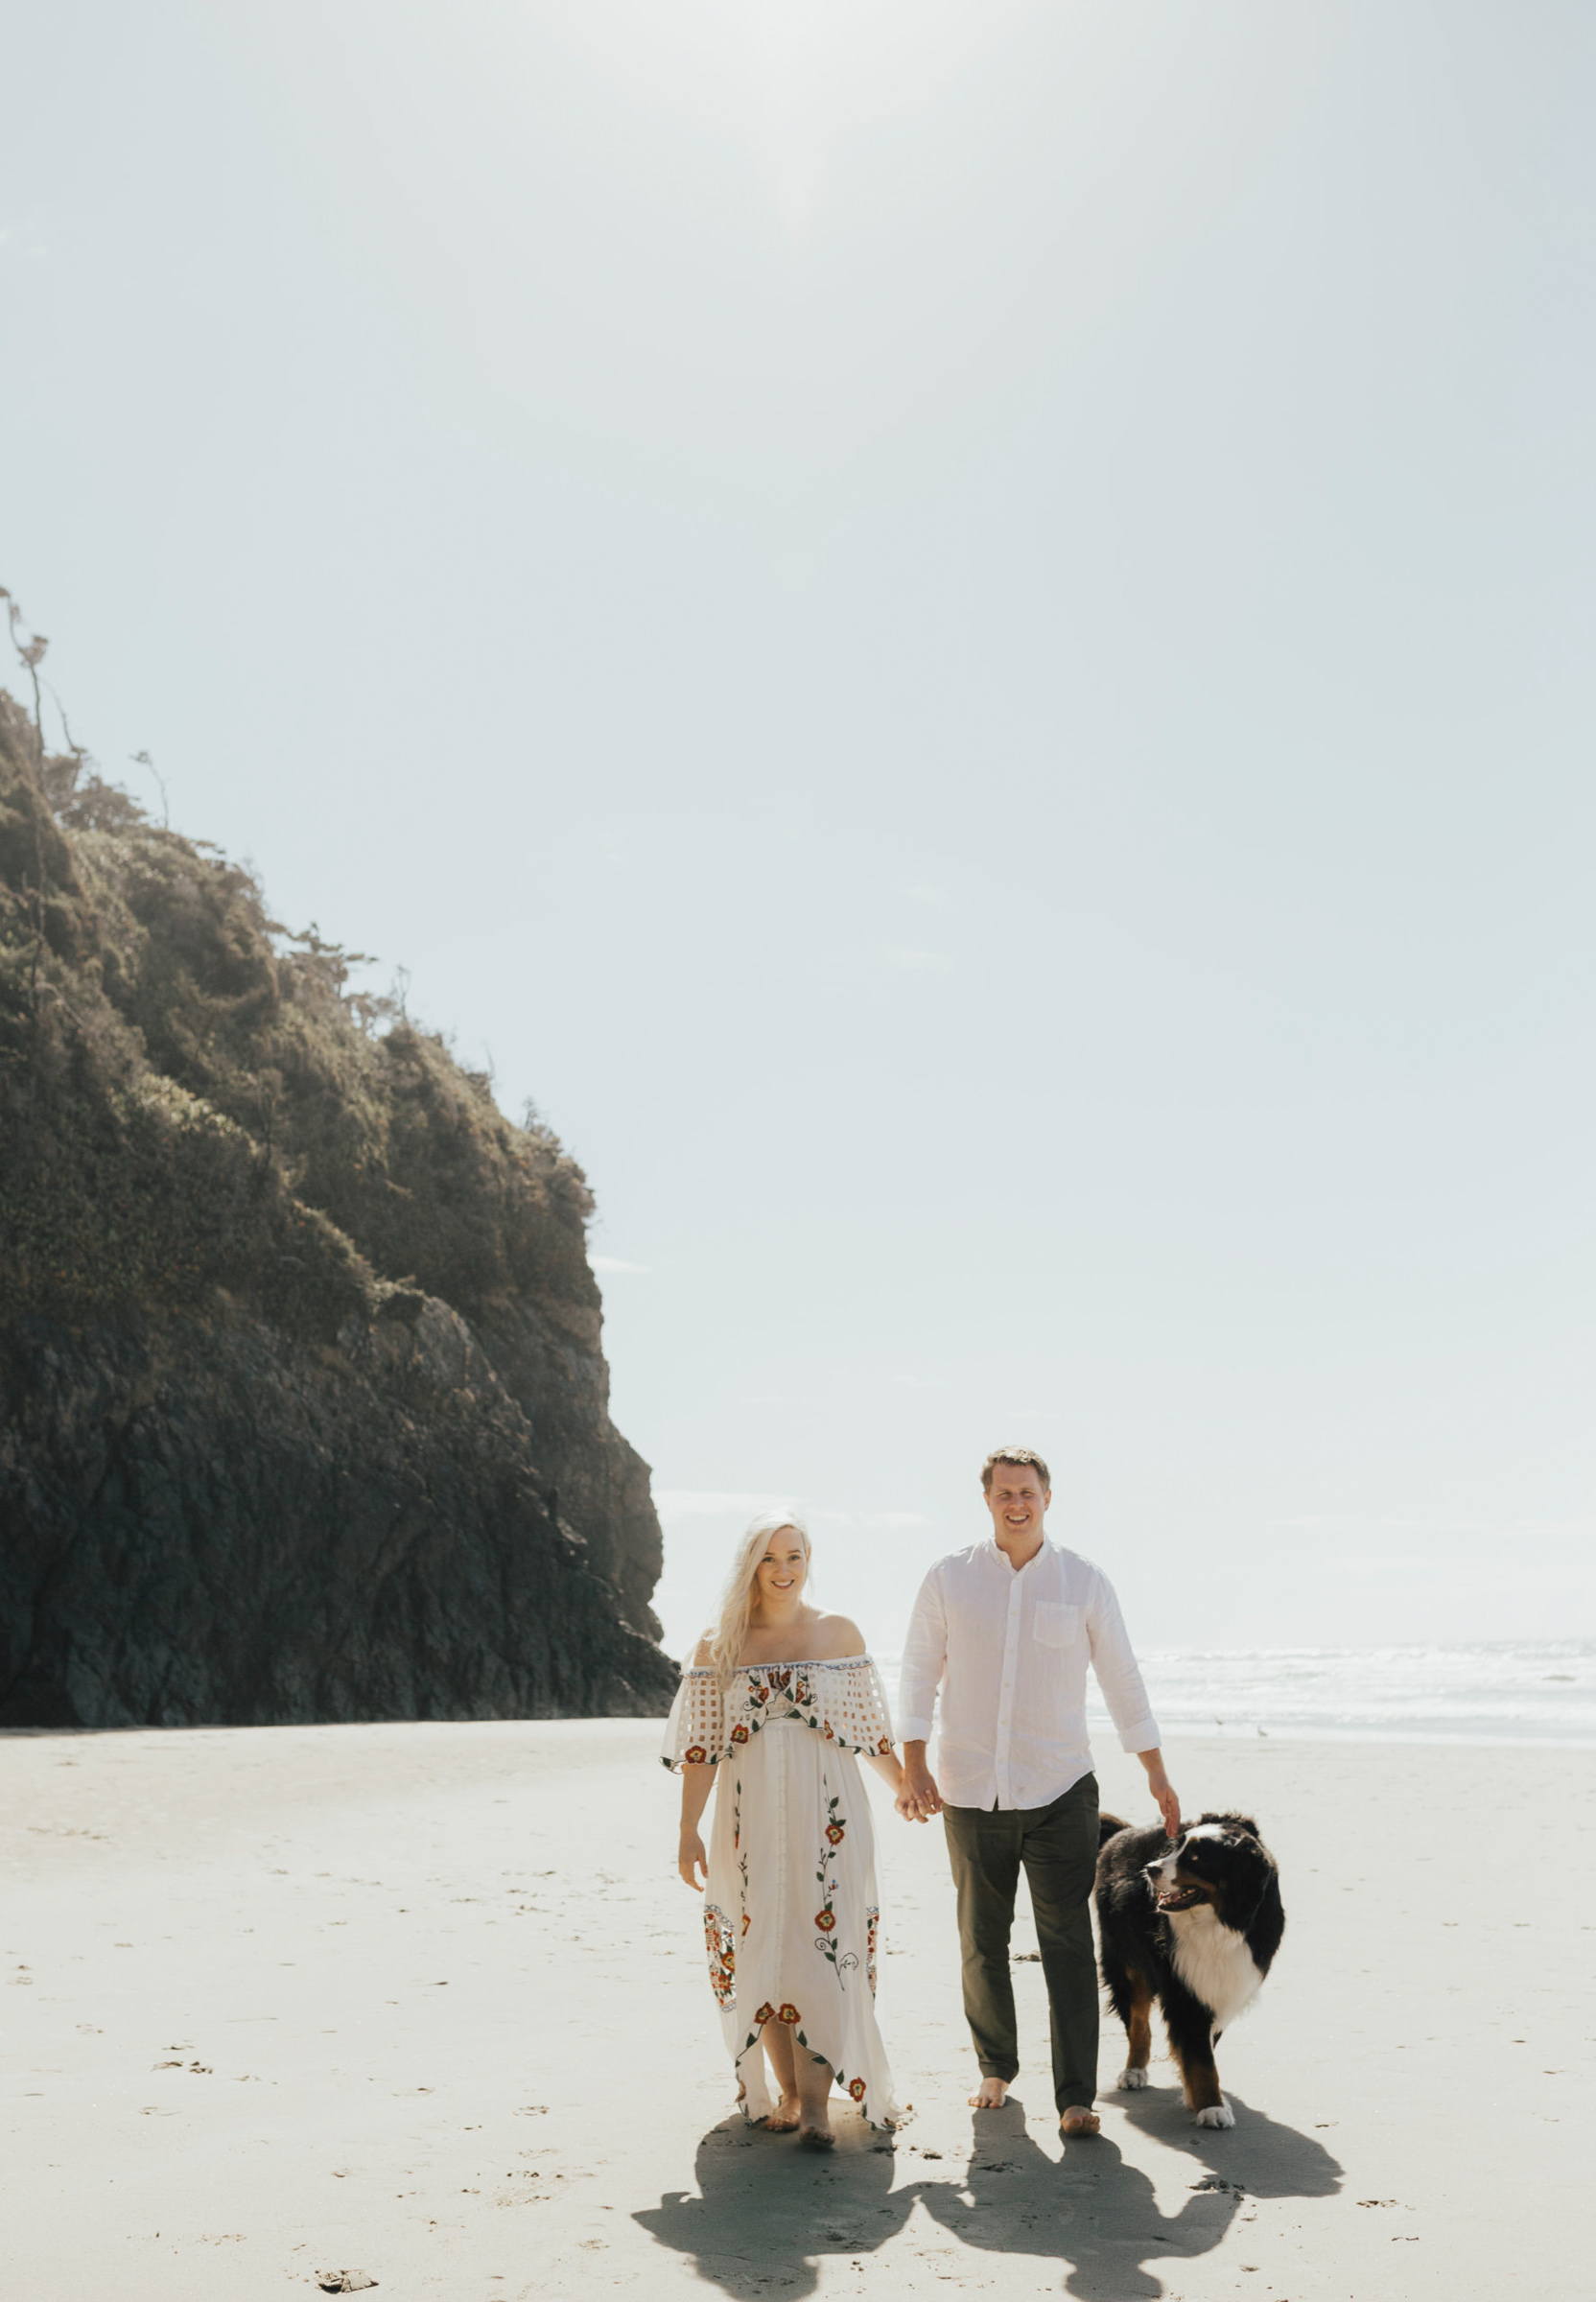 Maternity photography of a girl and her husband with their dog walking on a beach at the Oregon Coast